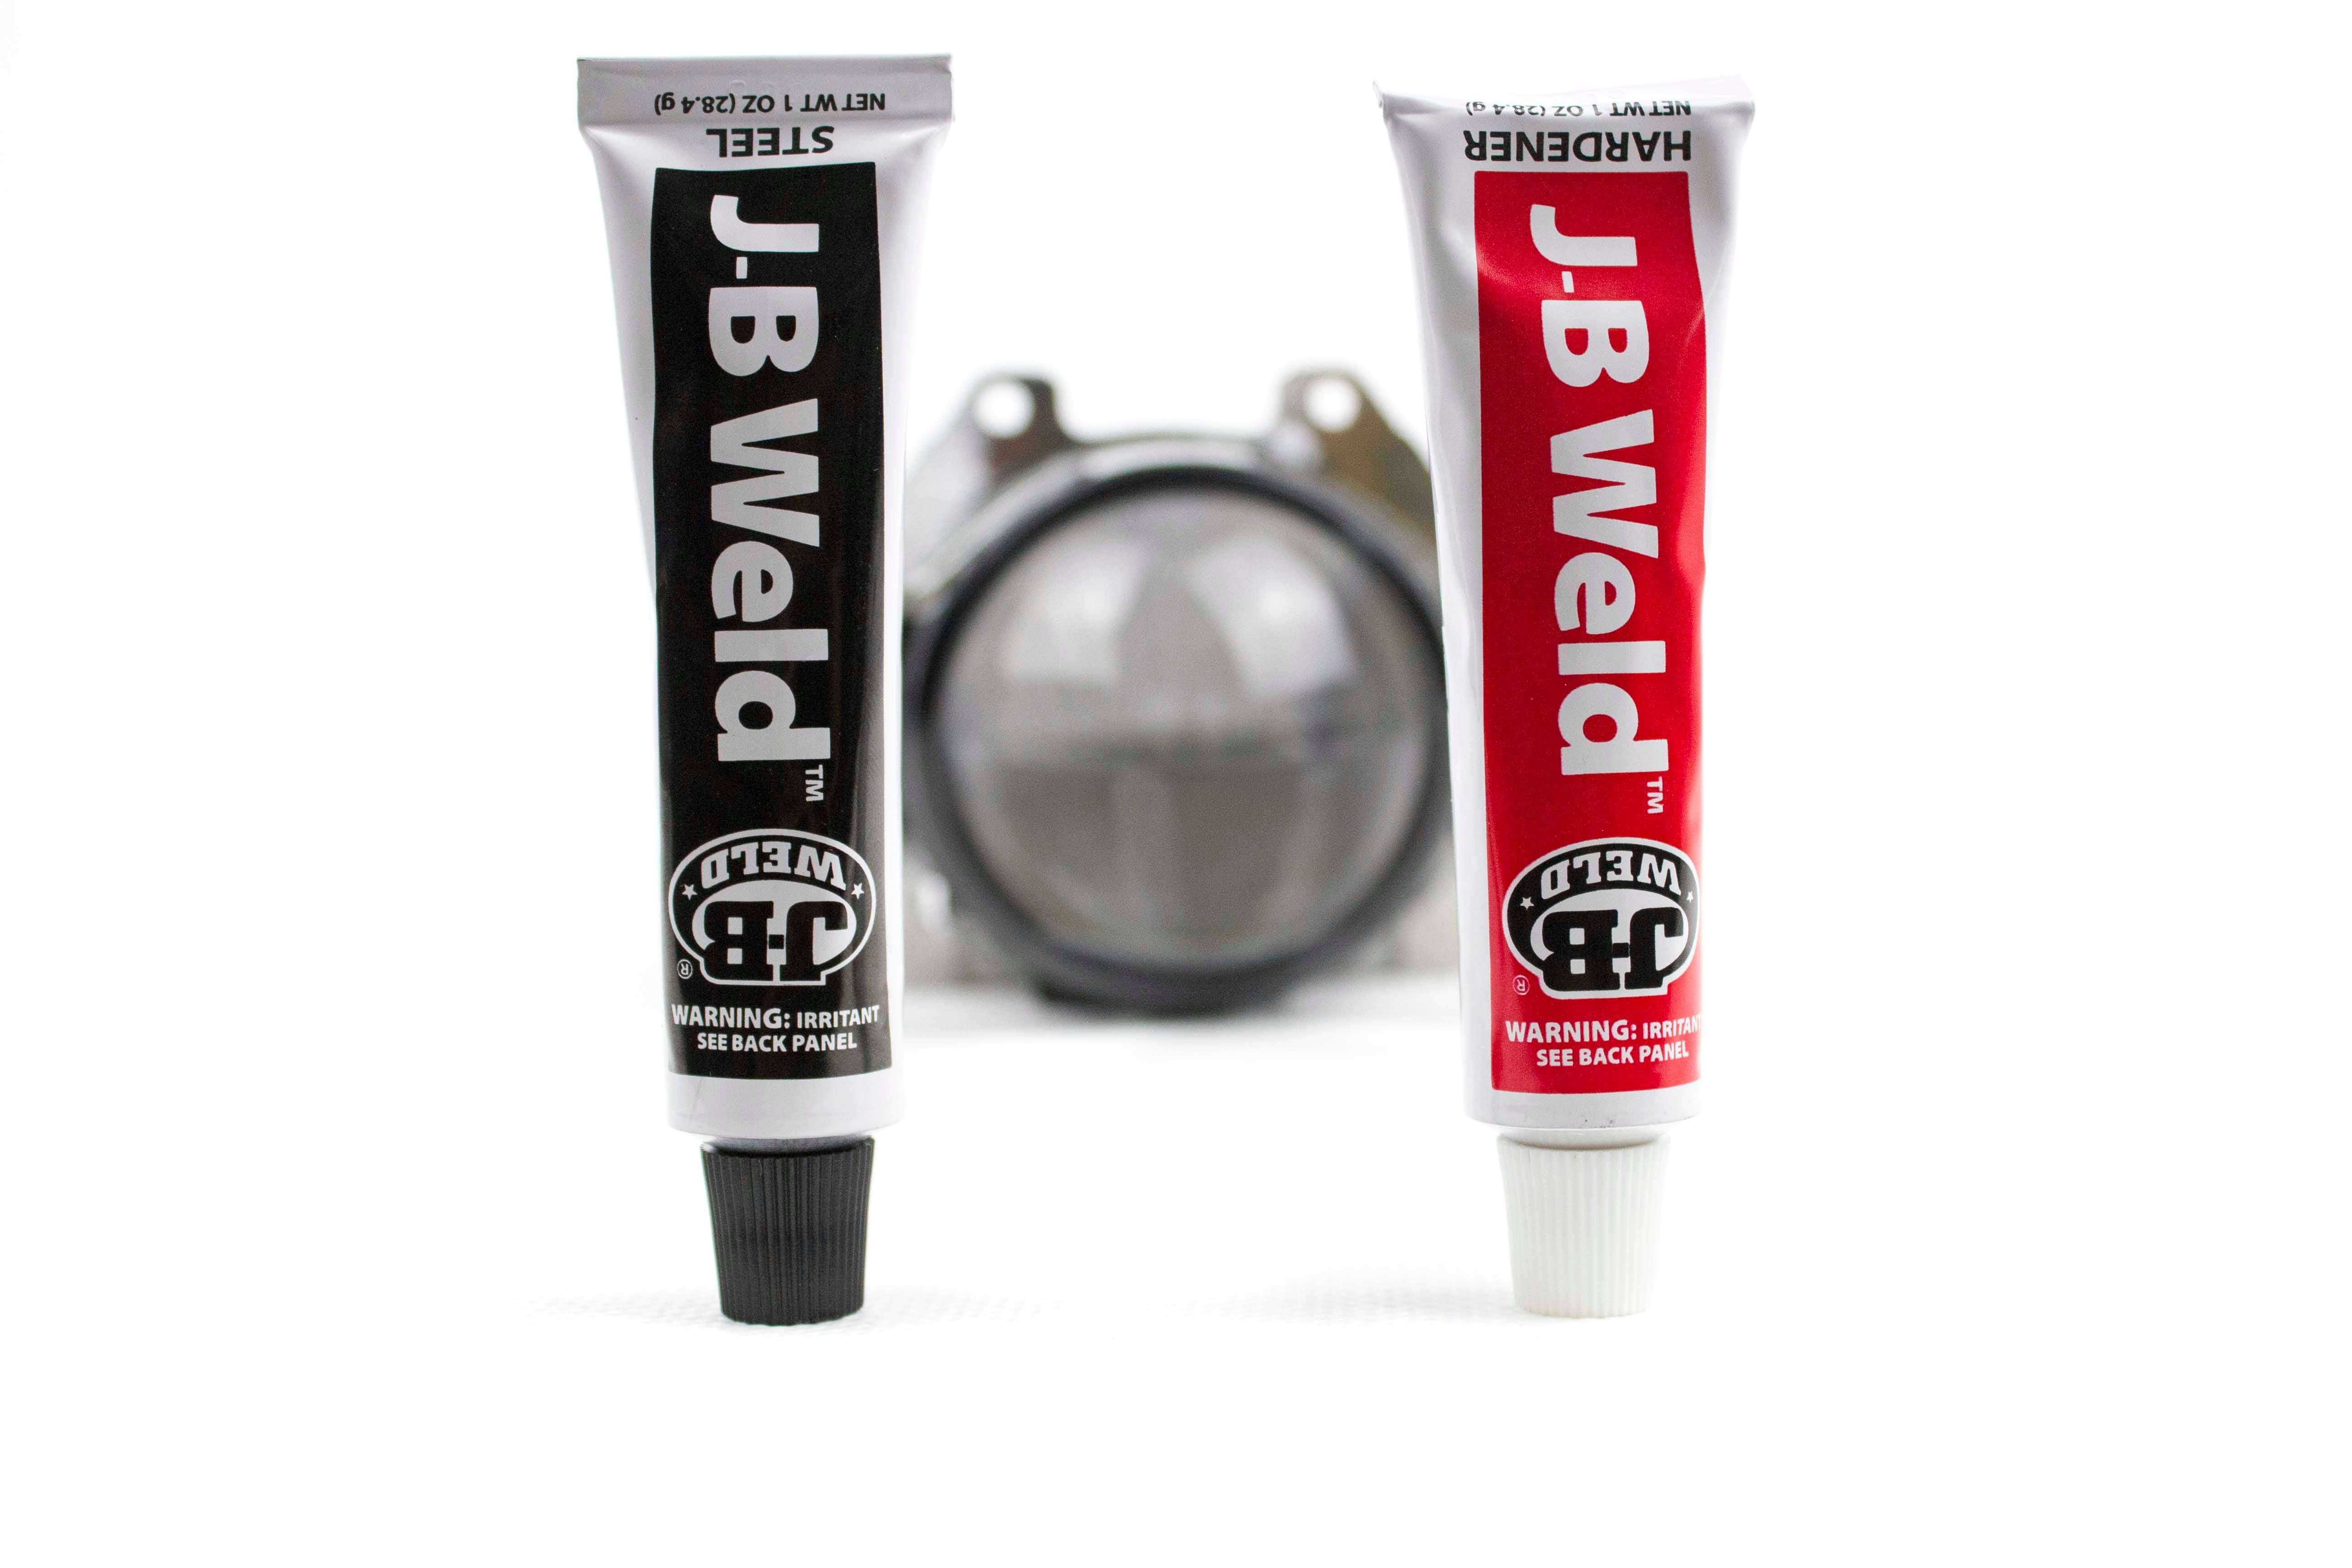 Reviews for J-B Weld Two 1 oz. Twin Tube Cold Weld Epoxy